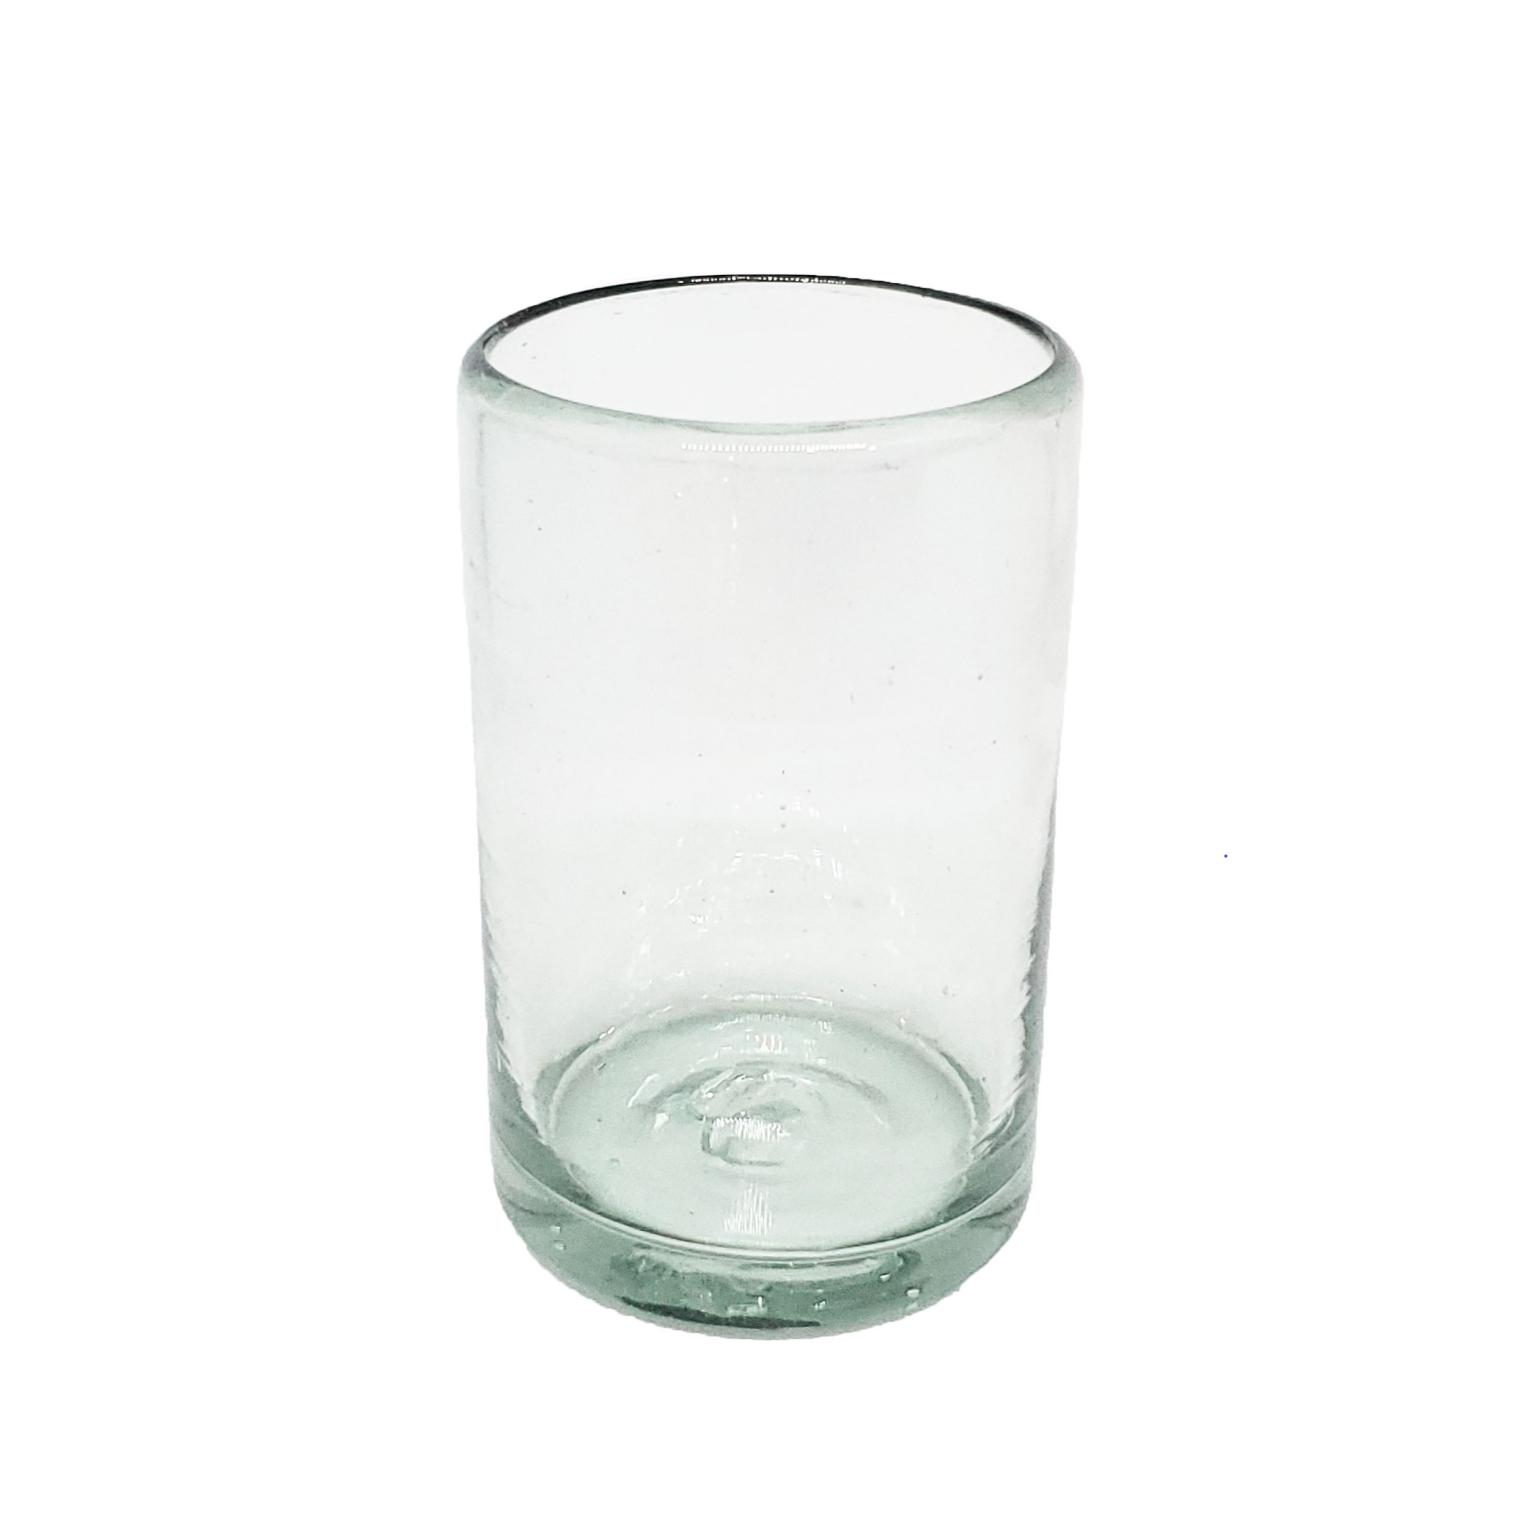 New Items / Clear 9 oz Juice Glasses (set of 6) / These handcrafted glasses deliver a classic touch to your favorite drink.